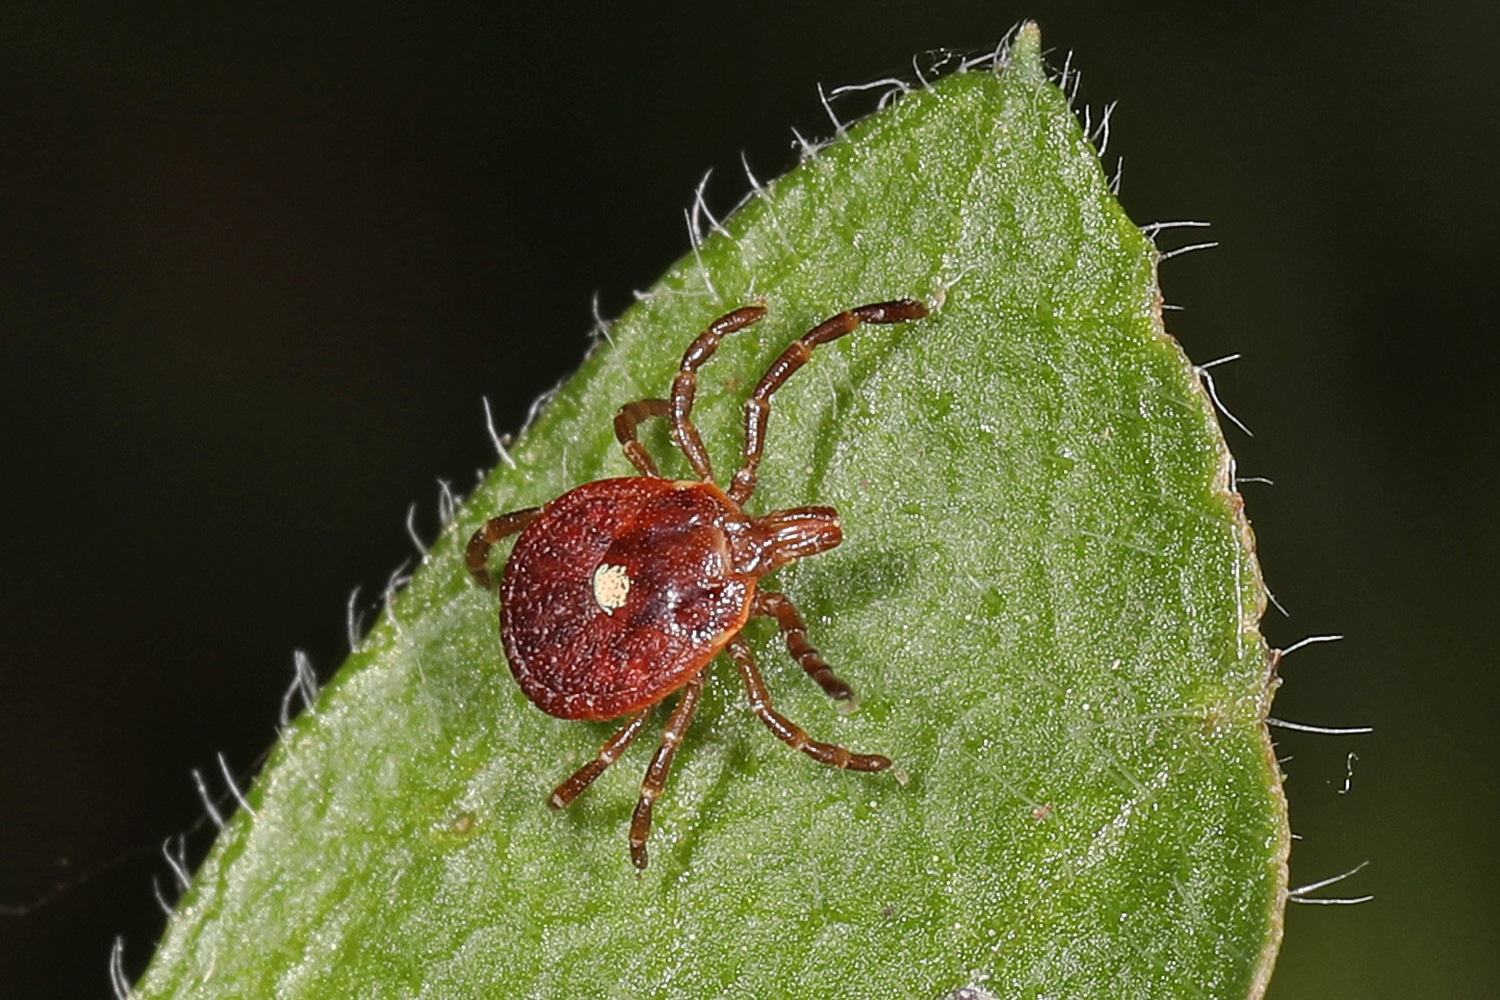 horizontal photo of a lone star tick on a leaf with a black background